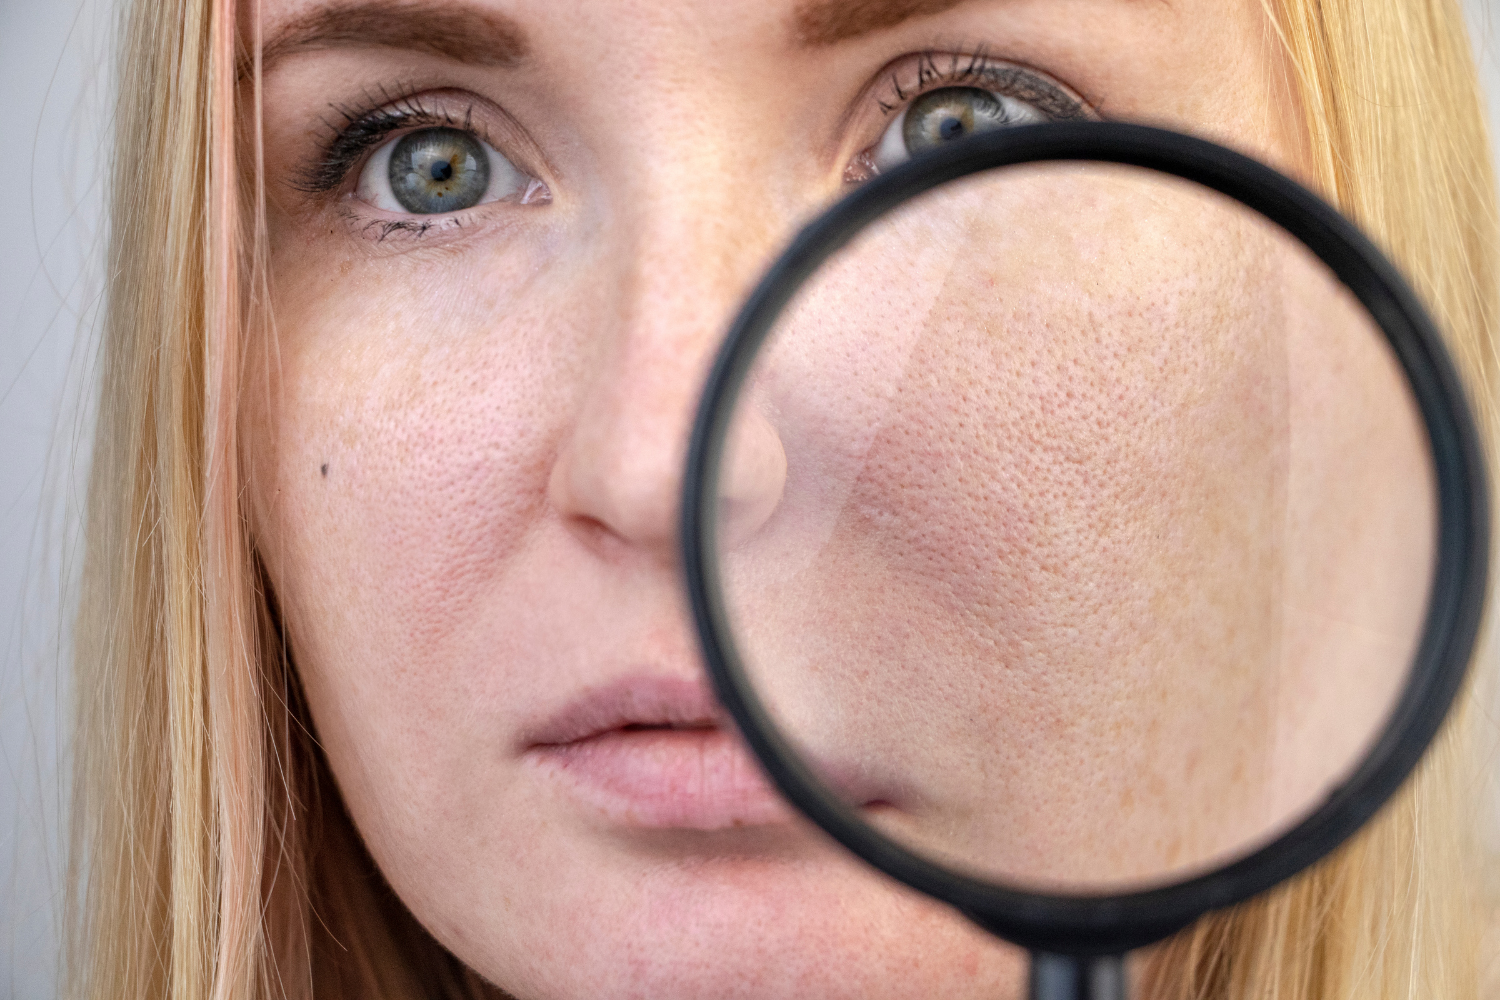 Causes of Pores: What Can Dermaroller Treatments Do For You?